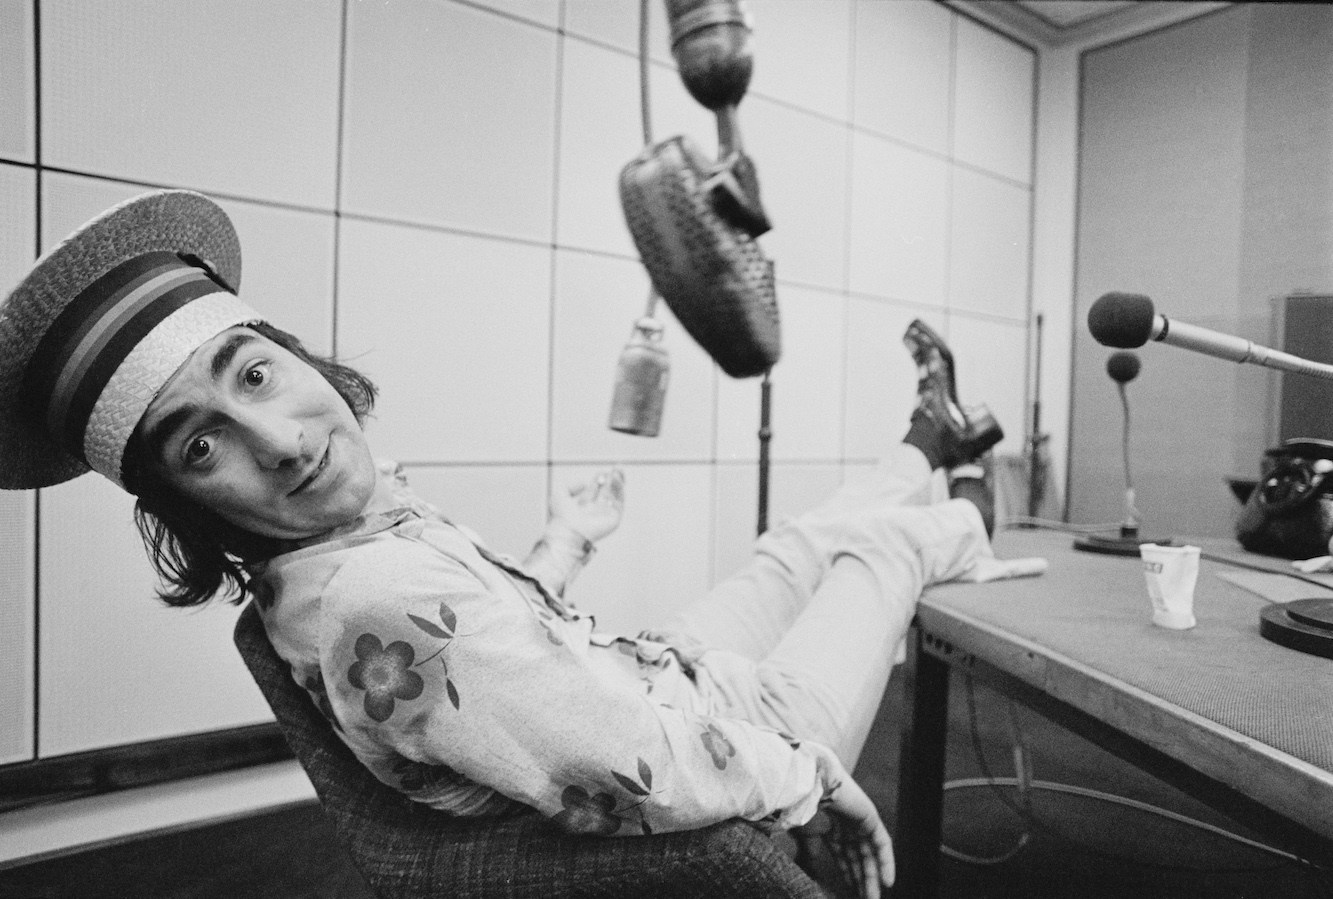 Drummer Keith Moon (1947 - 1978), of British rock group The Who, in a radio studio at Broadcasting House, London, 12th July 1973. Moon is recording skits to play between songs while filling in for disc jockey John Peel on BBC Radio 1's 'Top Gear' programme. (Photo by Jack Kay/Daily Express/Hulton Archive/Getty Images)